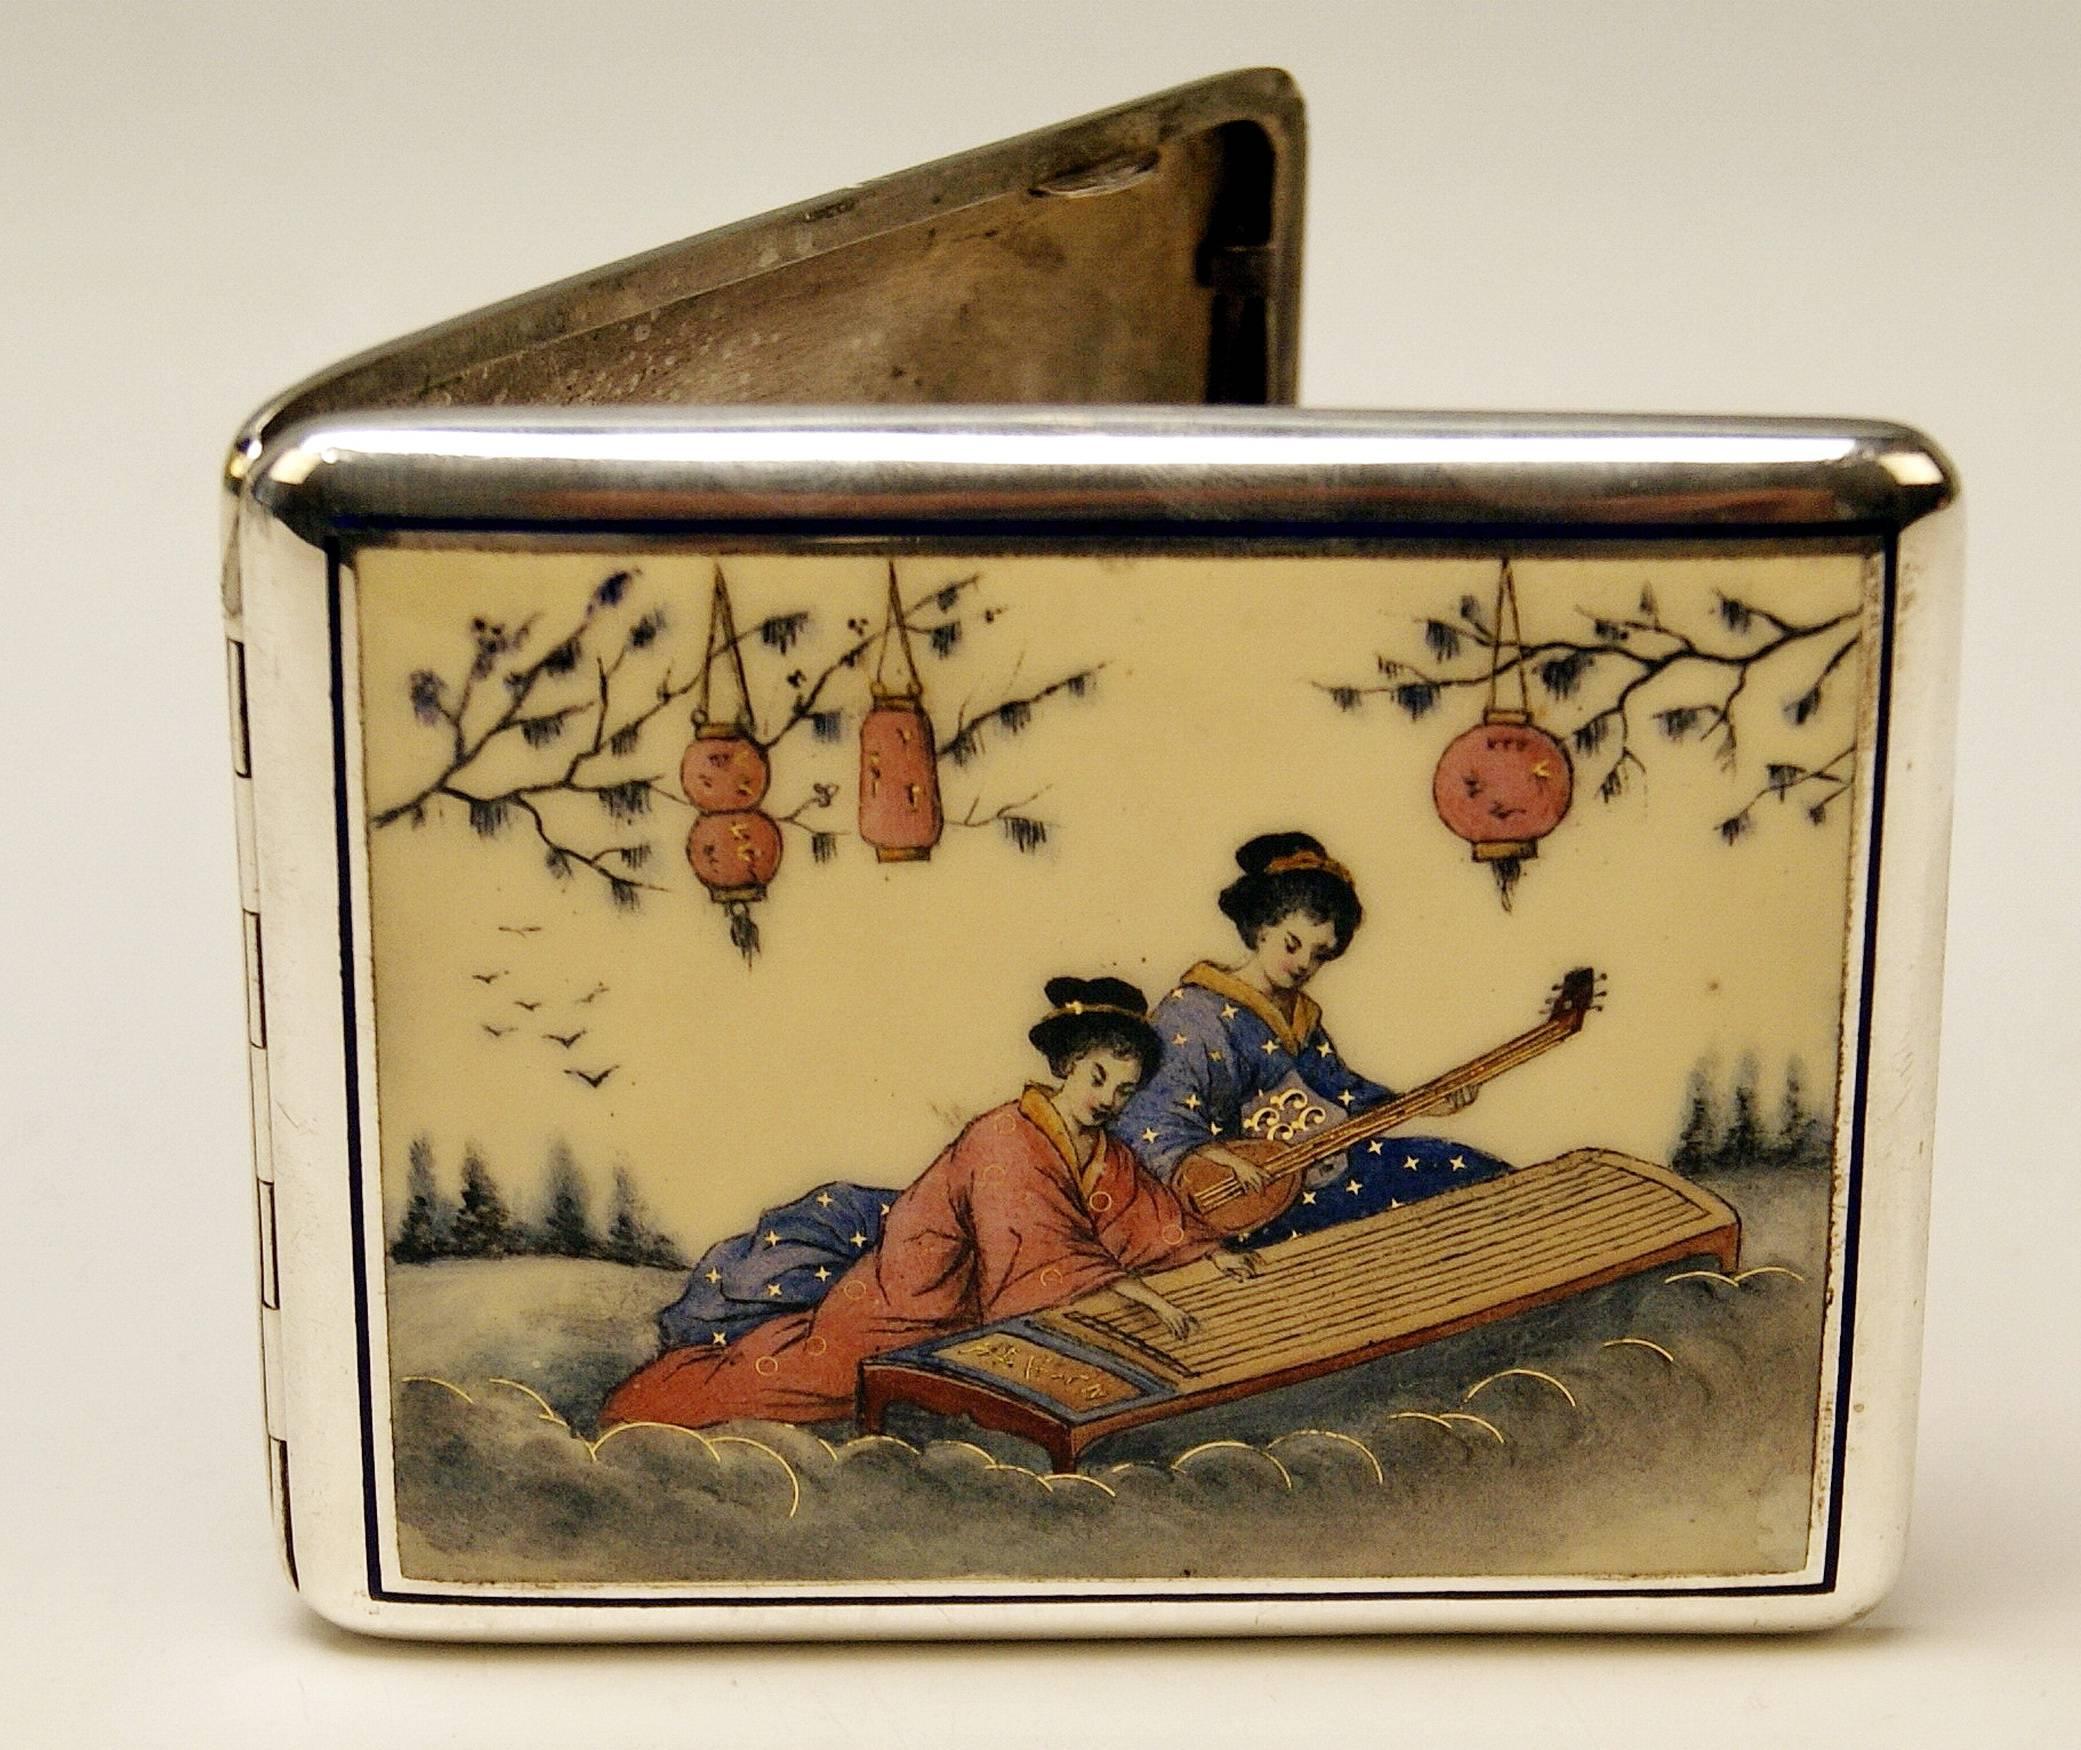 Painted Austrian Silver Cigarette Box Enamel Painting, Chinese Musicians circa 1910